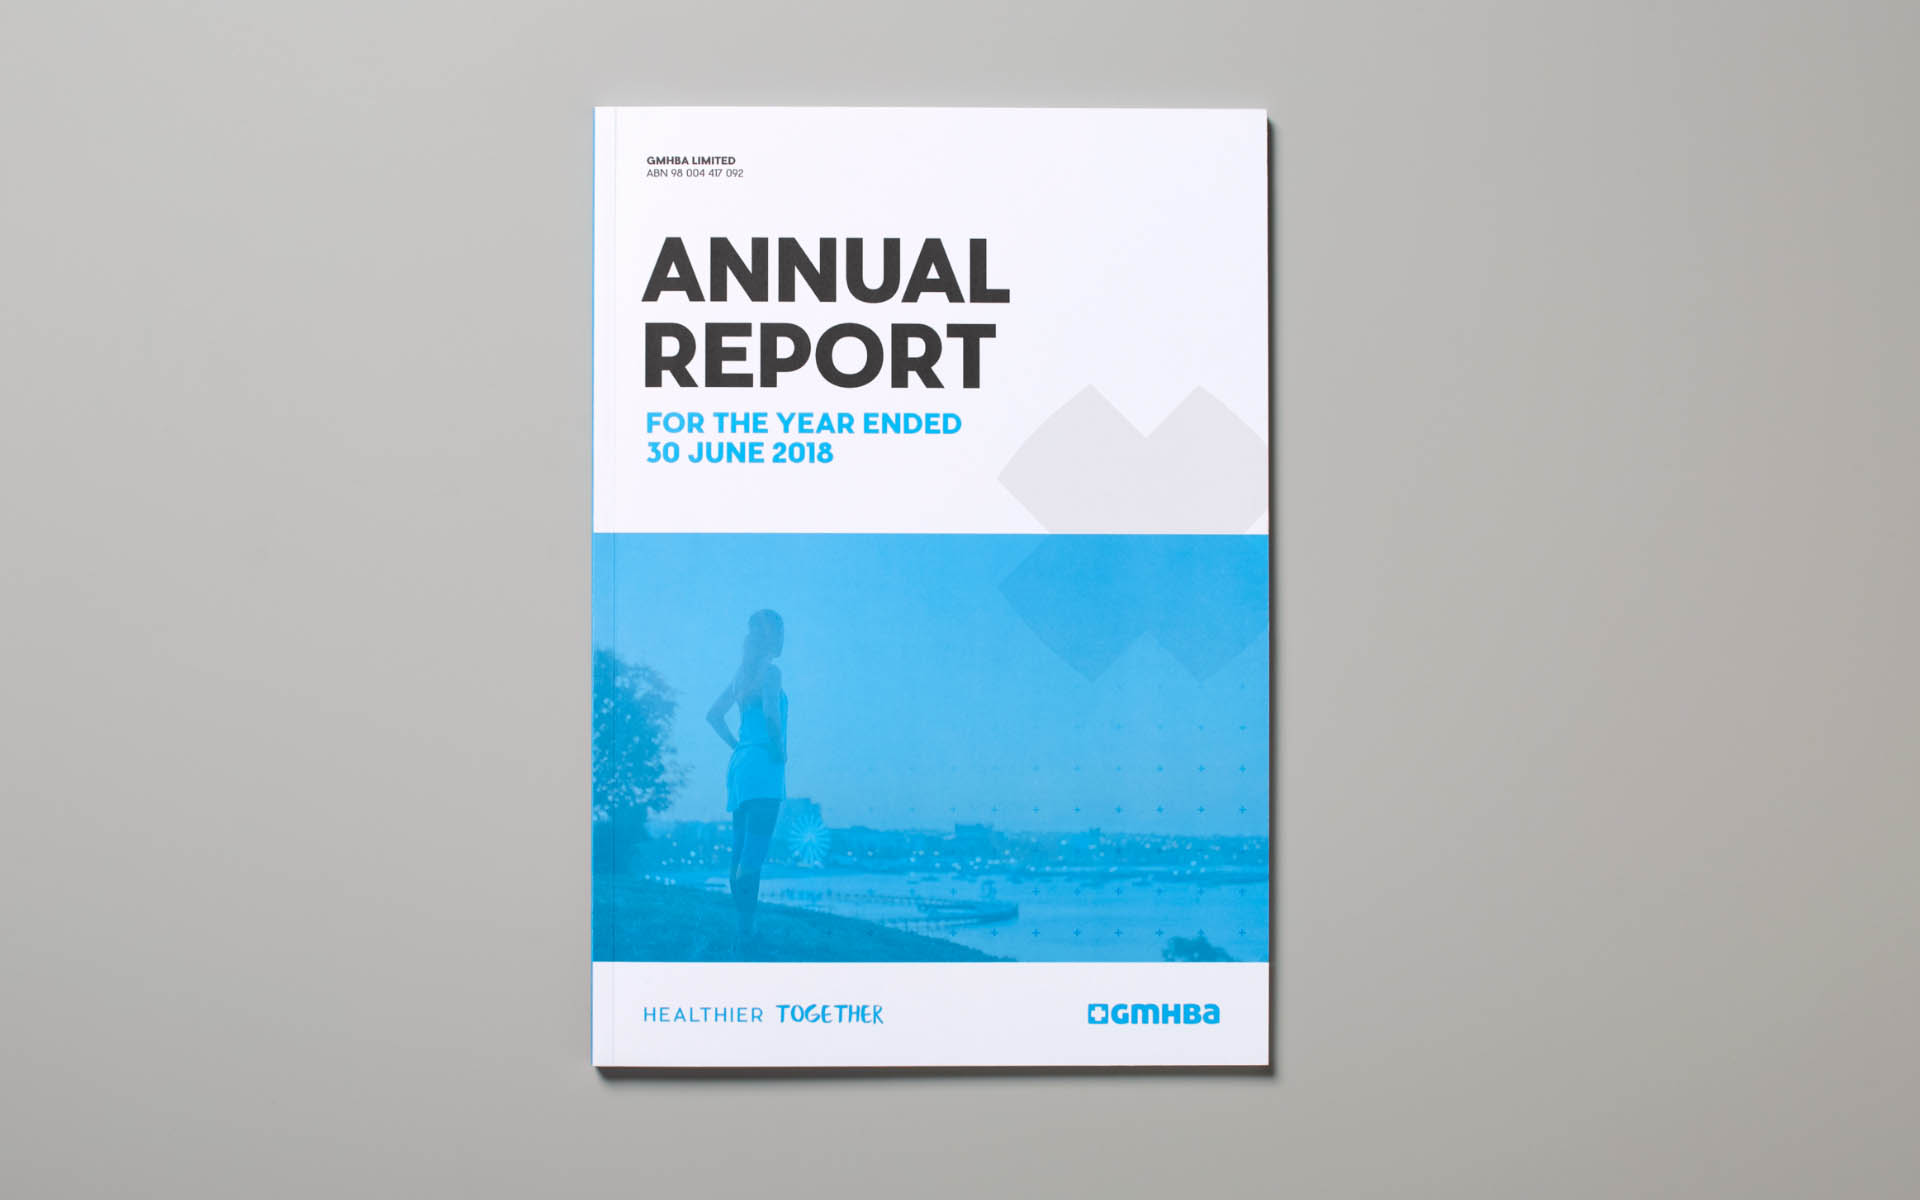 GMHBA printed annual report booklet